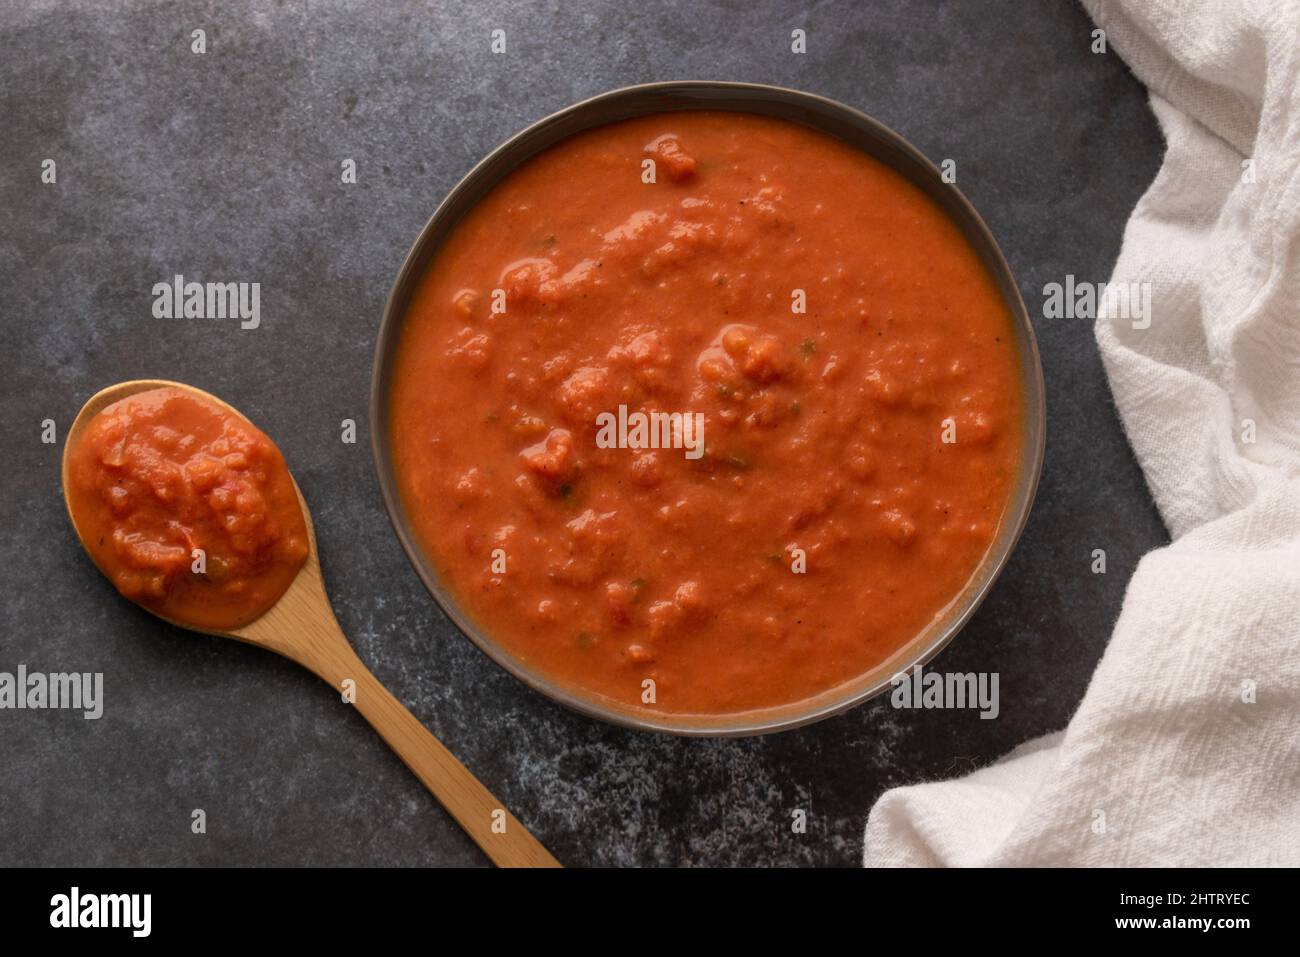 Vodka Sauce in a Bowl Stock Photo